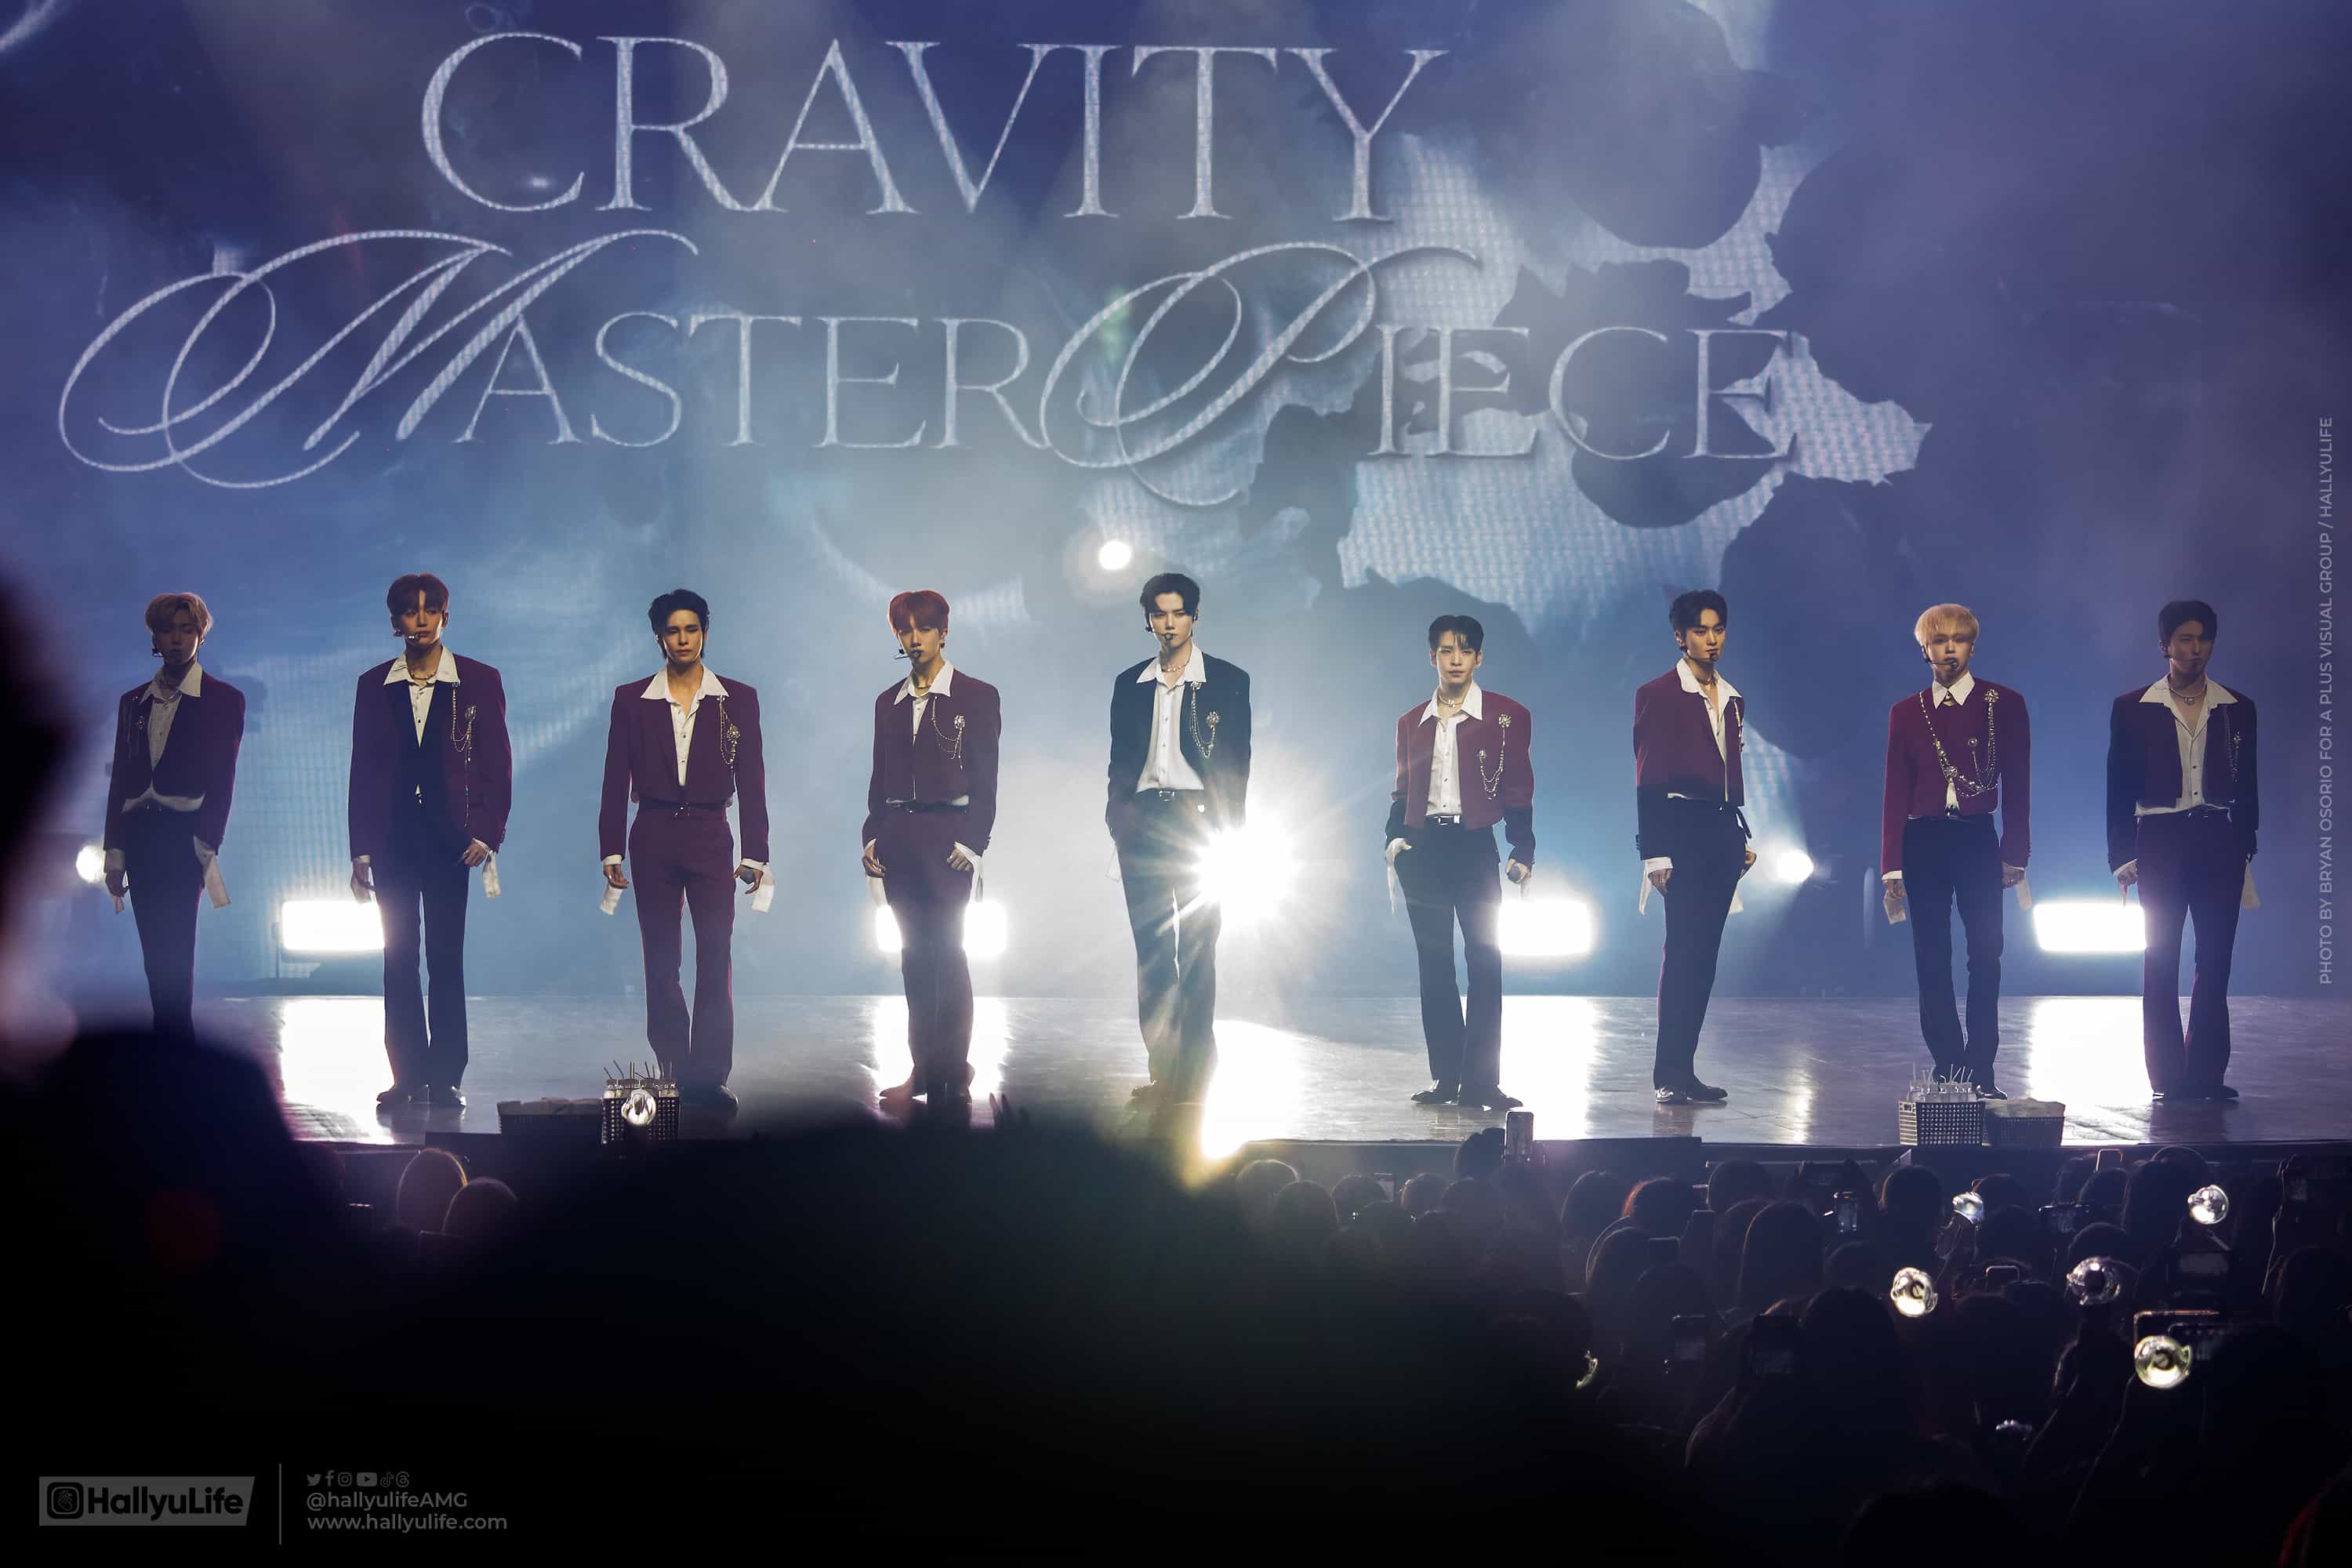 CRAVITY showcased a true 'masterpiece' during their concert in Manila ...